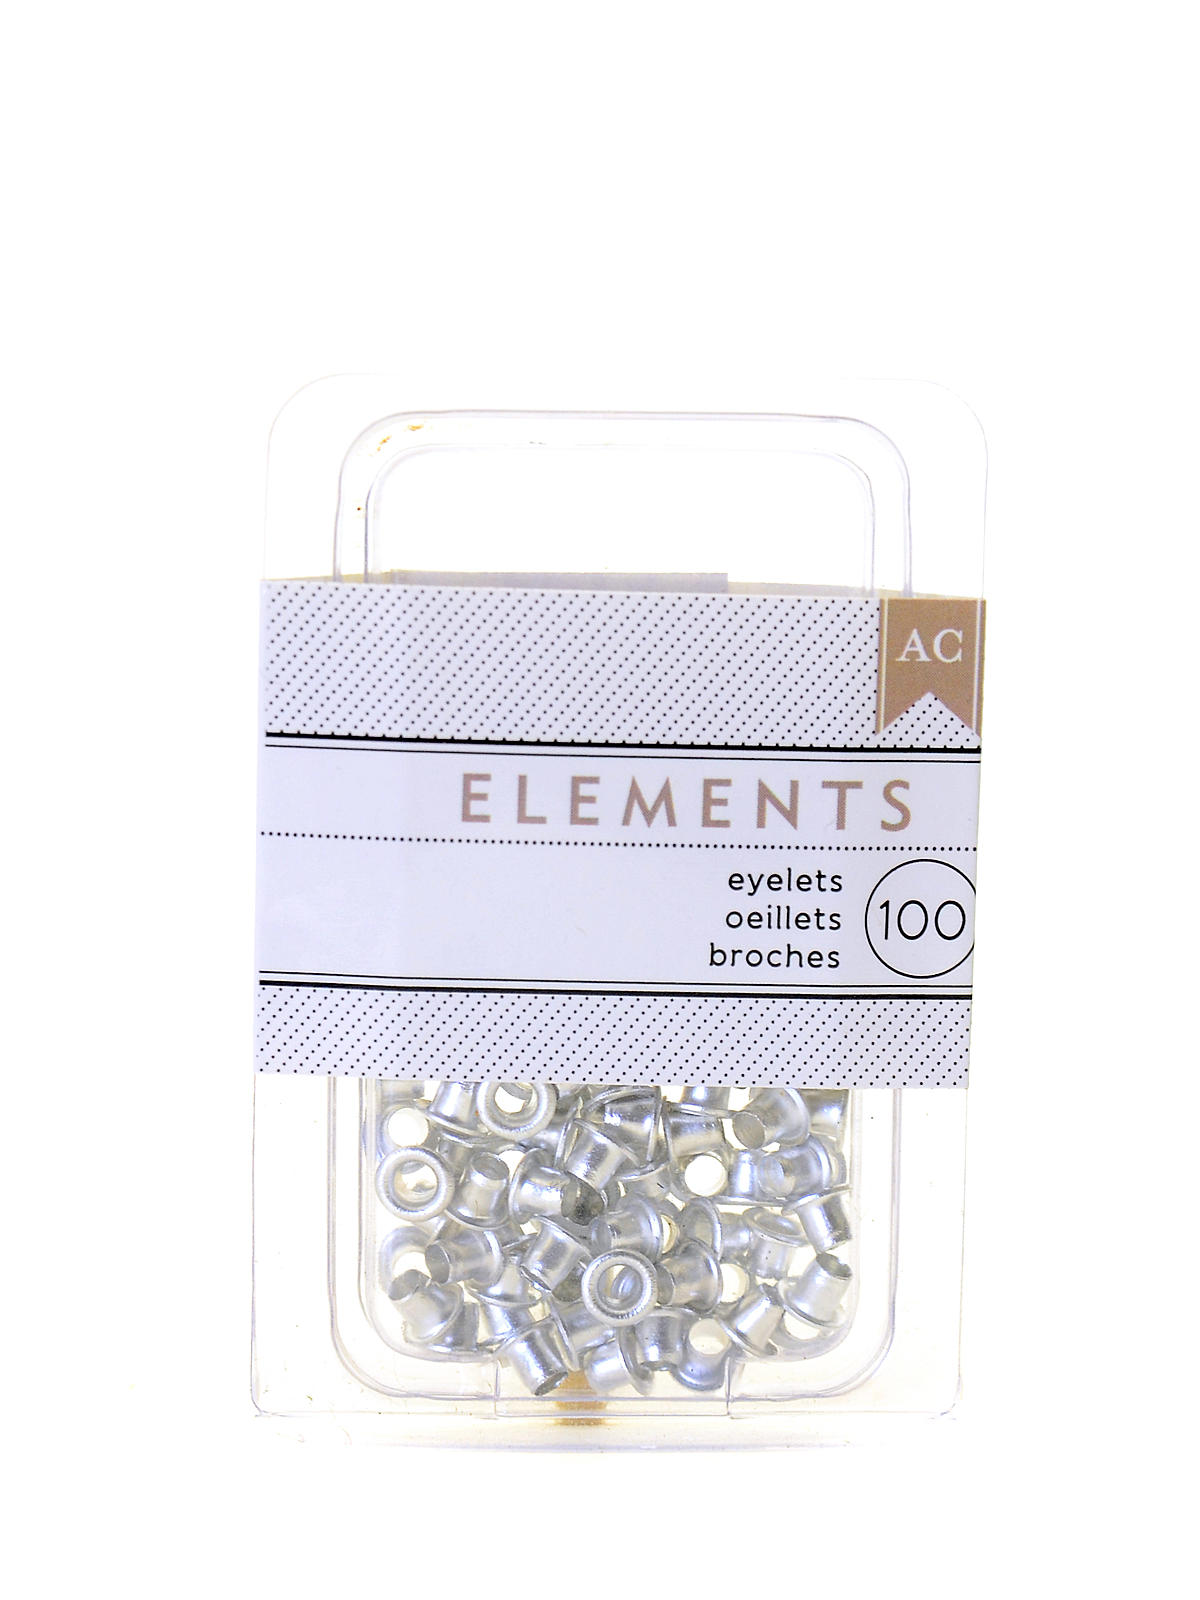 Metallic Eyelets Silver 1 8 In. Pack Of 100